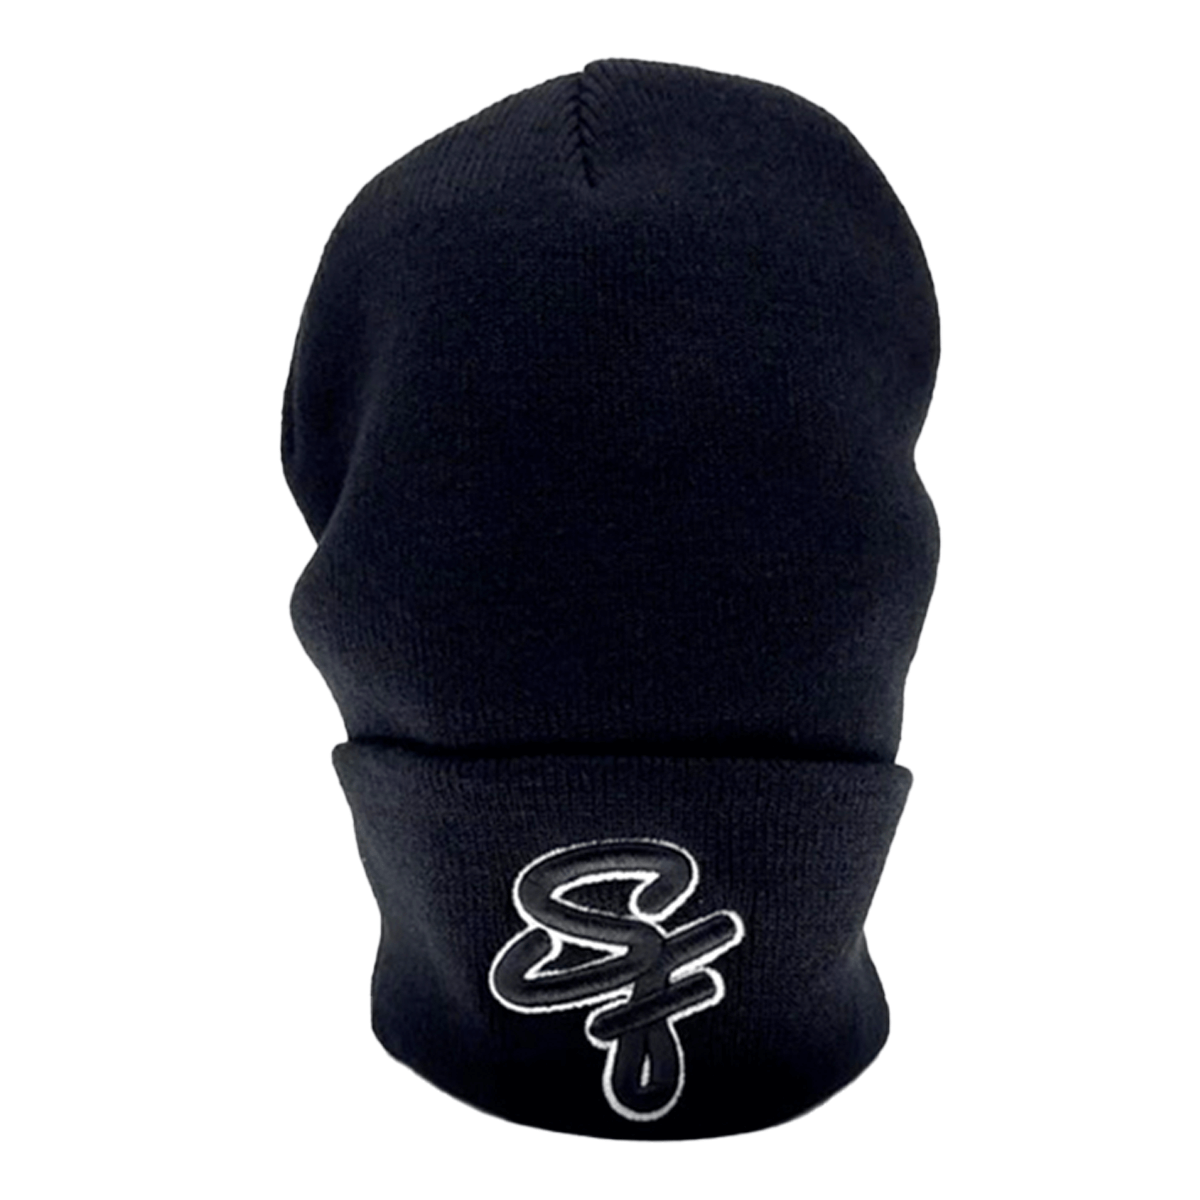 - THE PARKSIDE BEANIE -